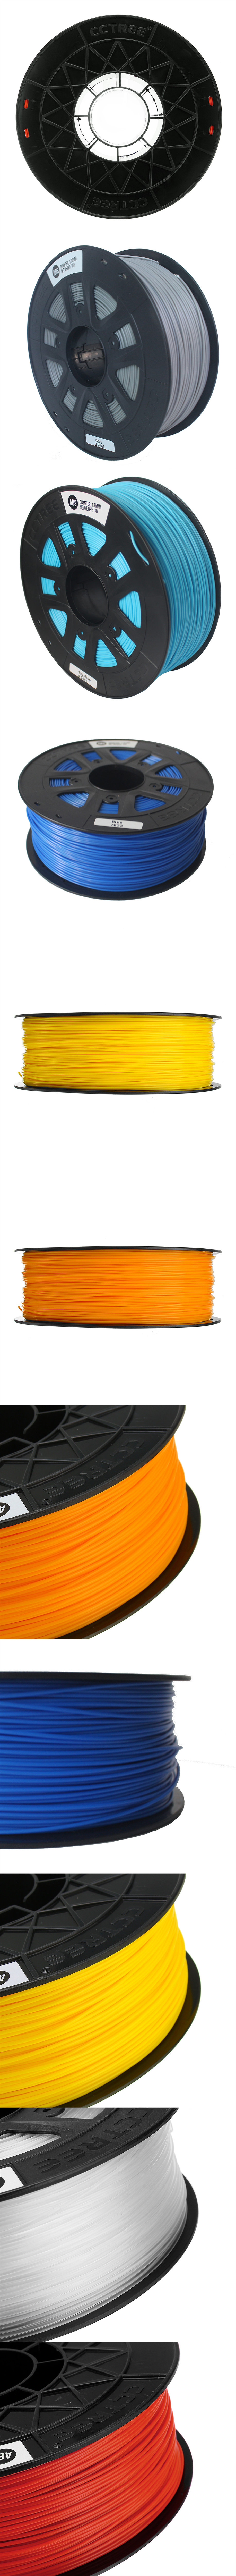 CCTREE® 1KG/Roll 1.75mm Many Colors ABS Filament for Crealilty/TEVO/Anet 3D Printer